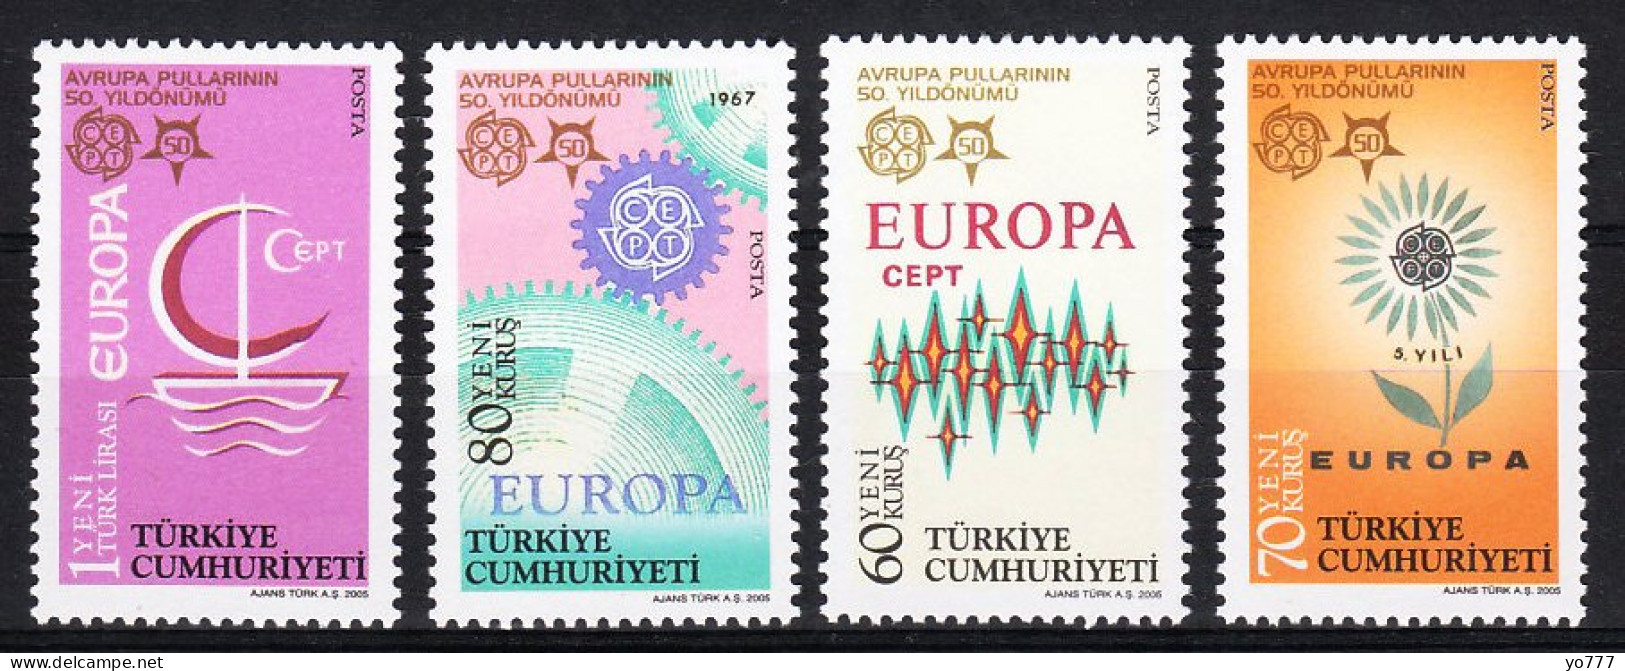 (3487-90) EUROPA (C.E.P.T.) - 50 YEARS OF EUROPA STAMPS SET MNH** - Unused Stamps